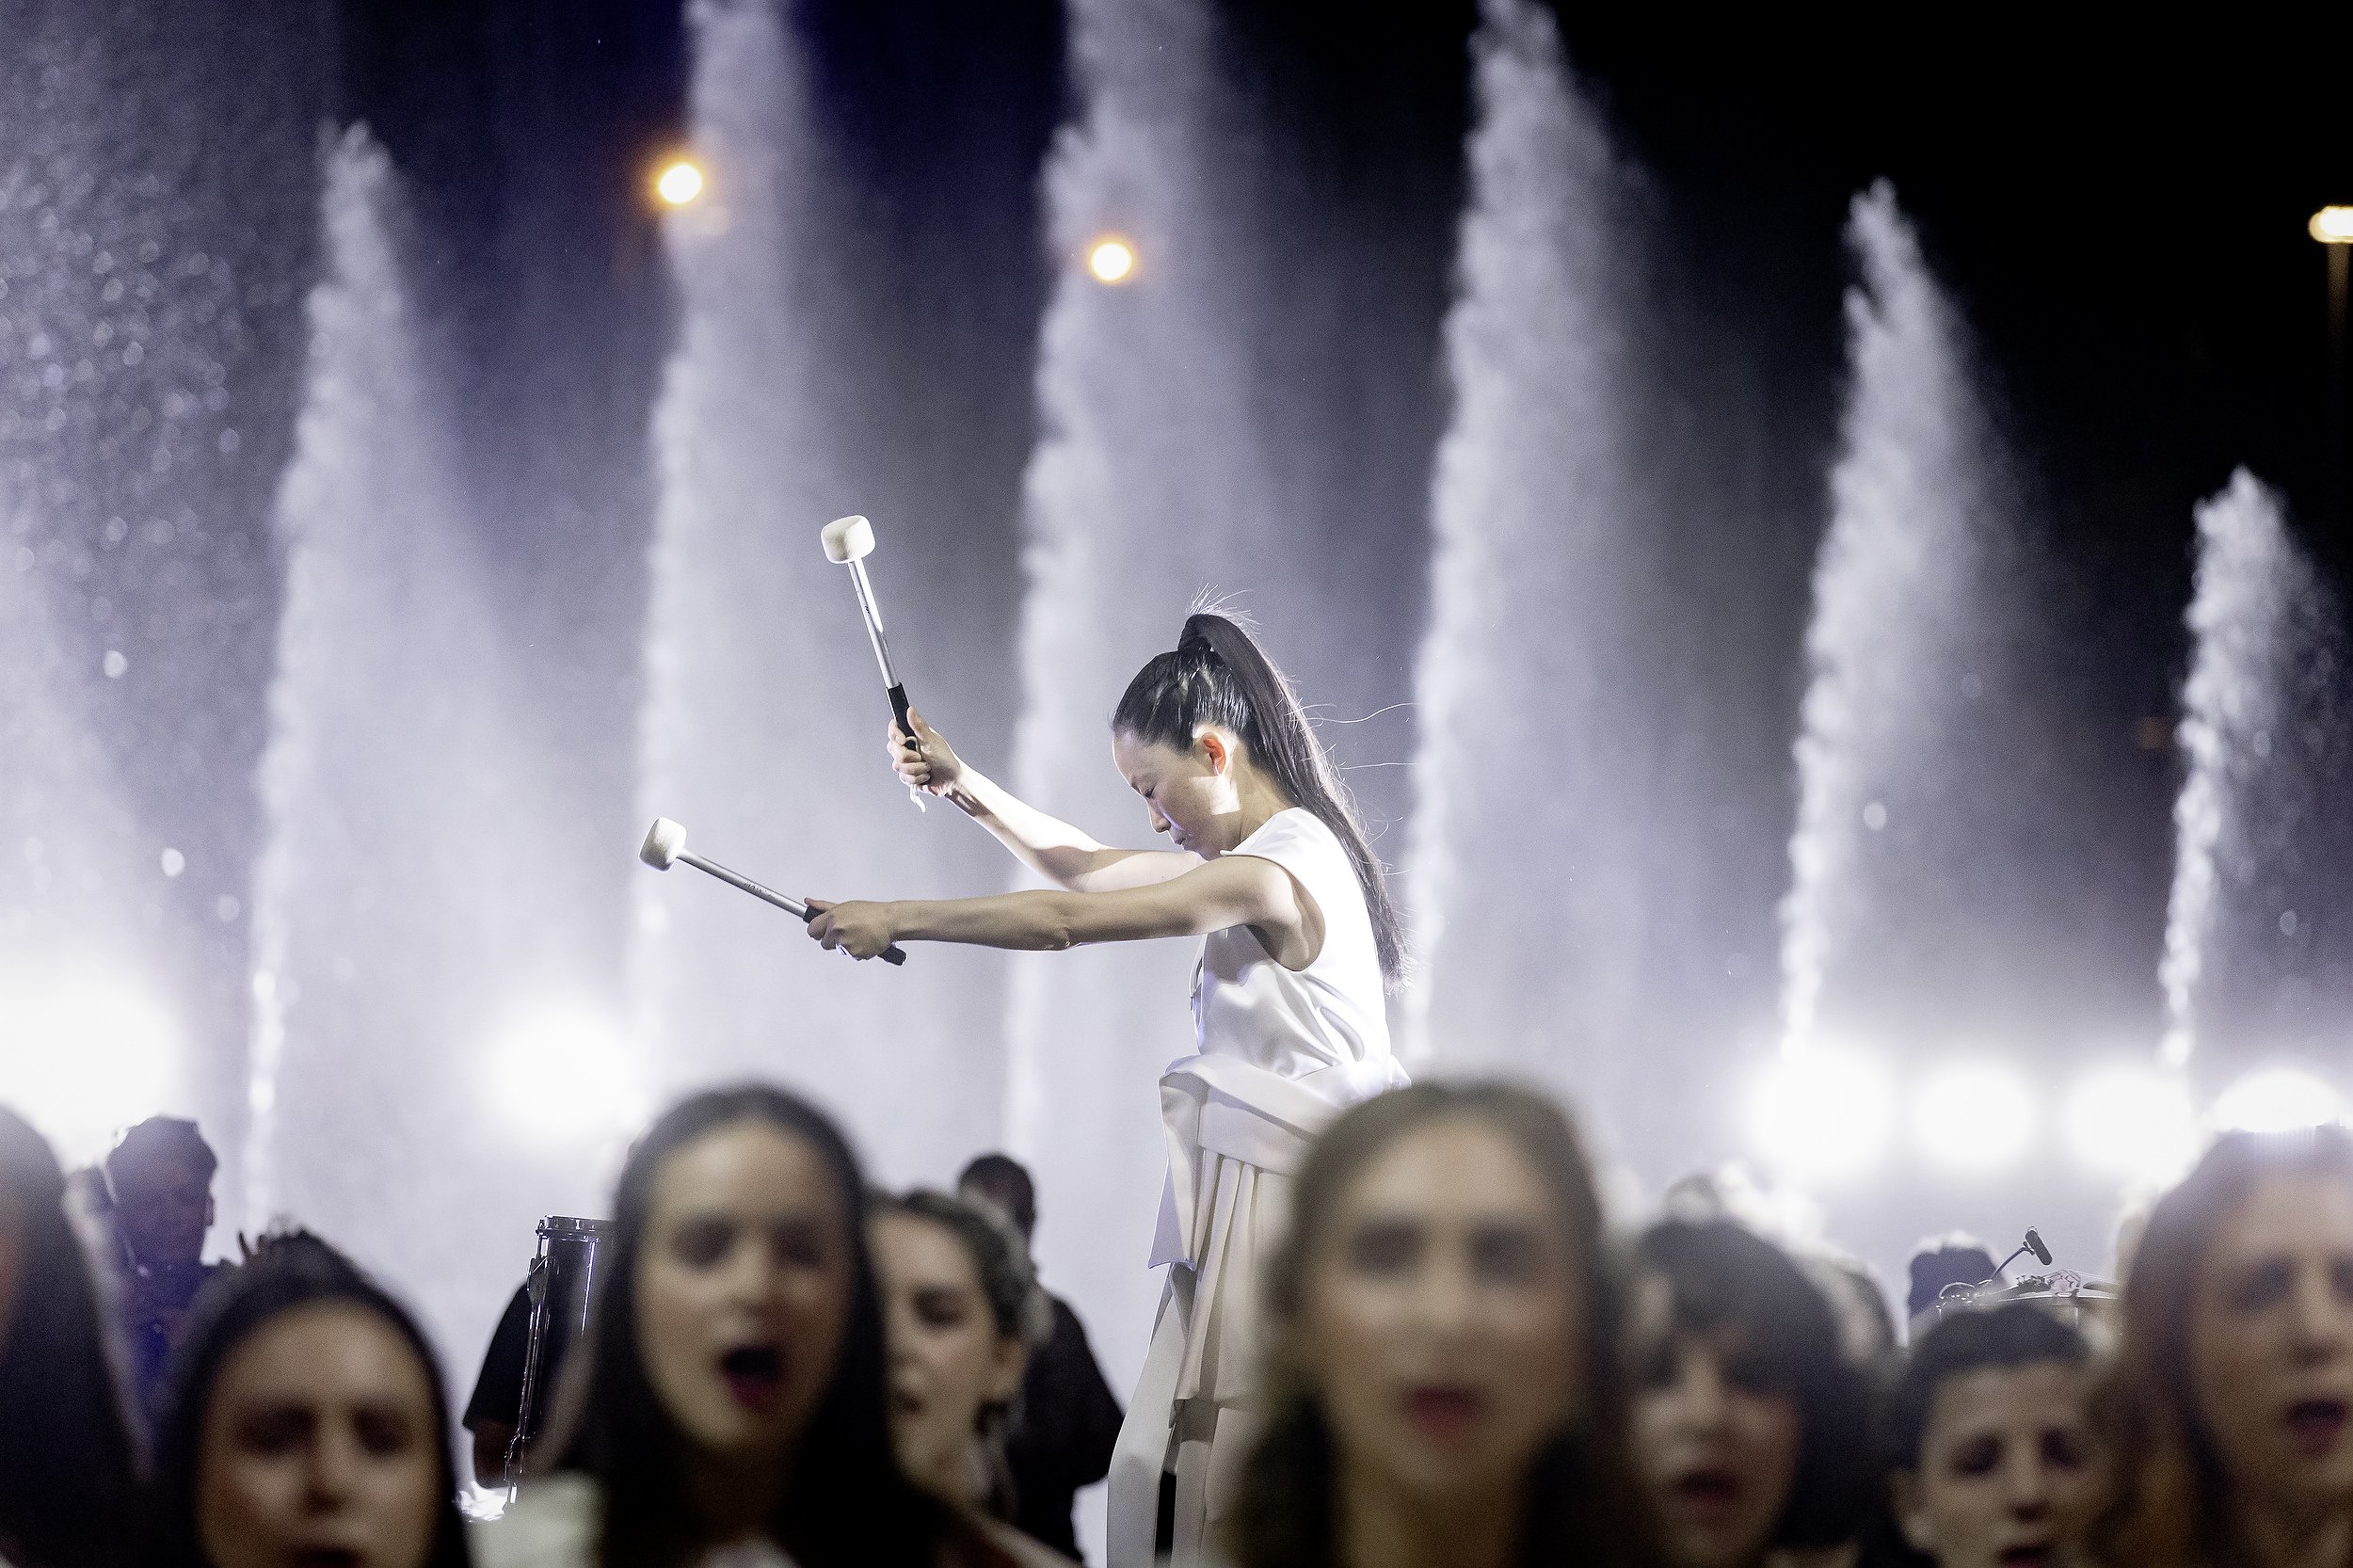  Premiere of “ARTEMIS: Fountain” at Stavros Niarchos Foundation Cultural Center in Athens, with CHORES. Photo by ©Rolex.  